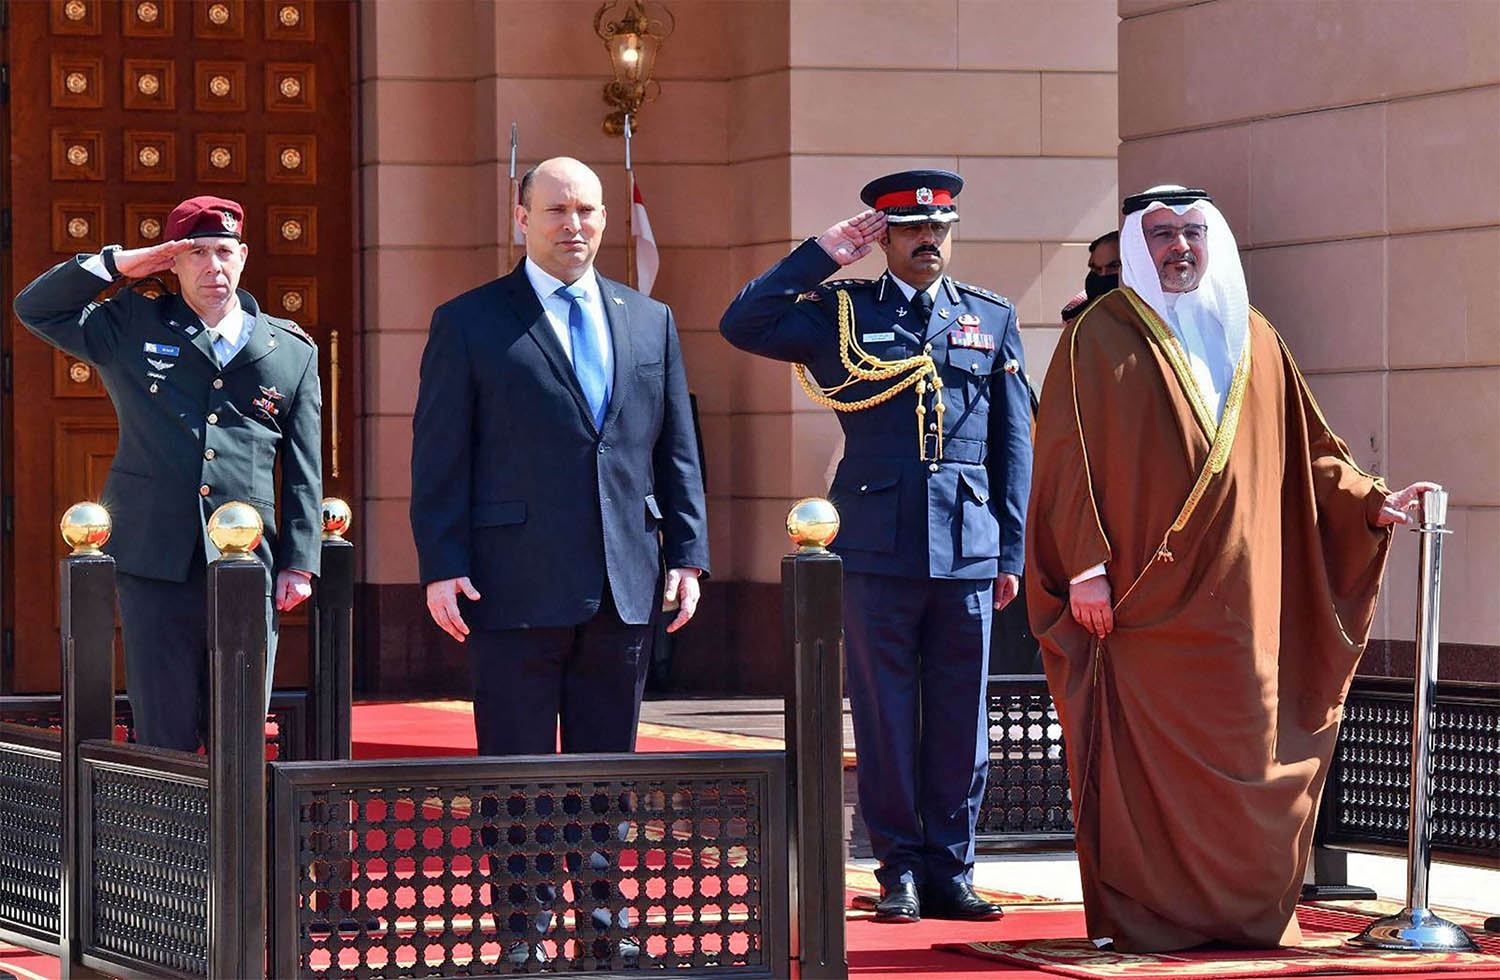 Prince Salman: We must do more to get to know one another and build upon the Abraham Accords